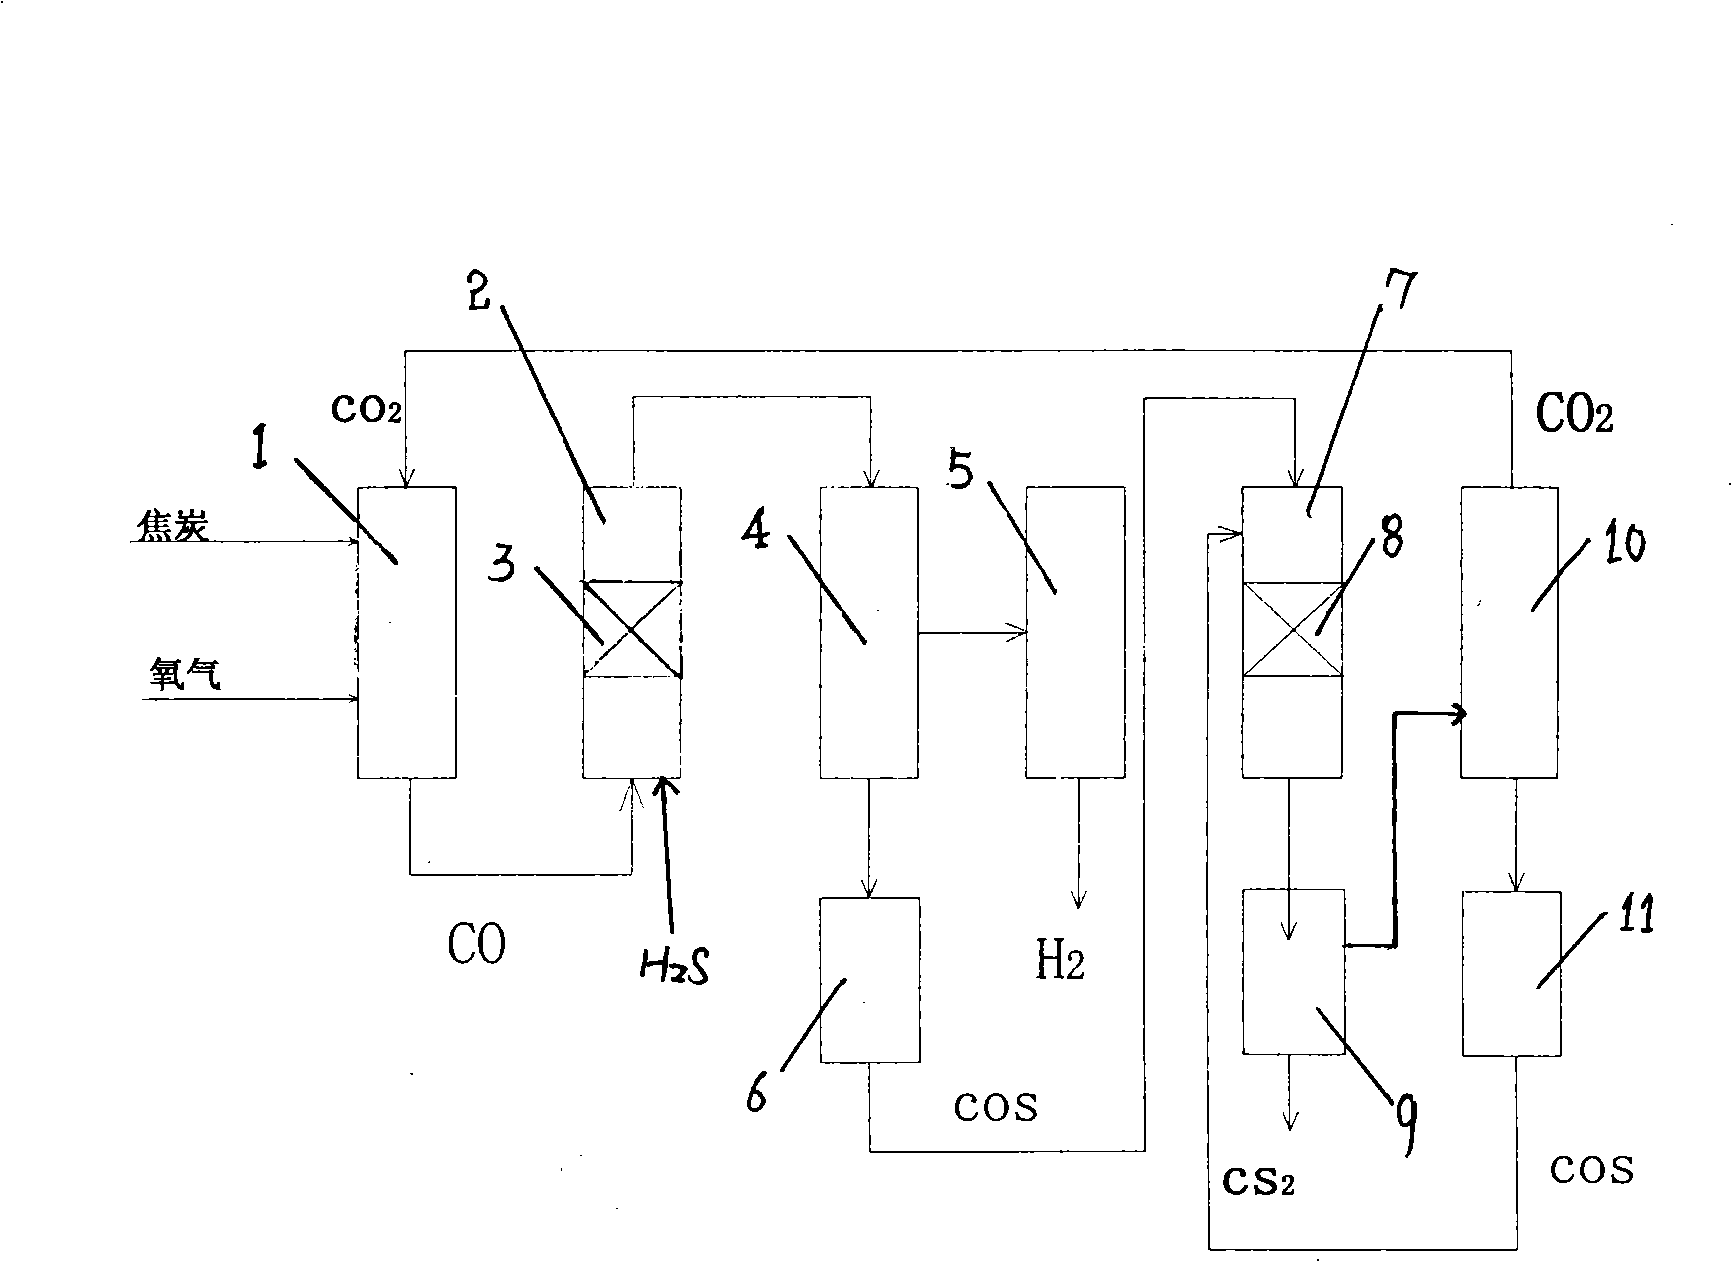 Process for producing hydrogen gas and carbon disulphide from hydrogen sulfide